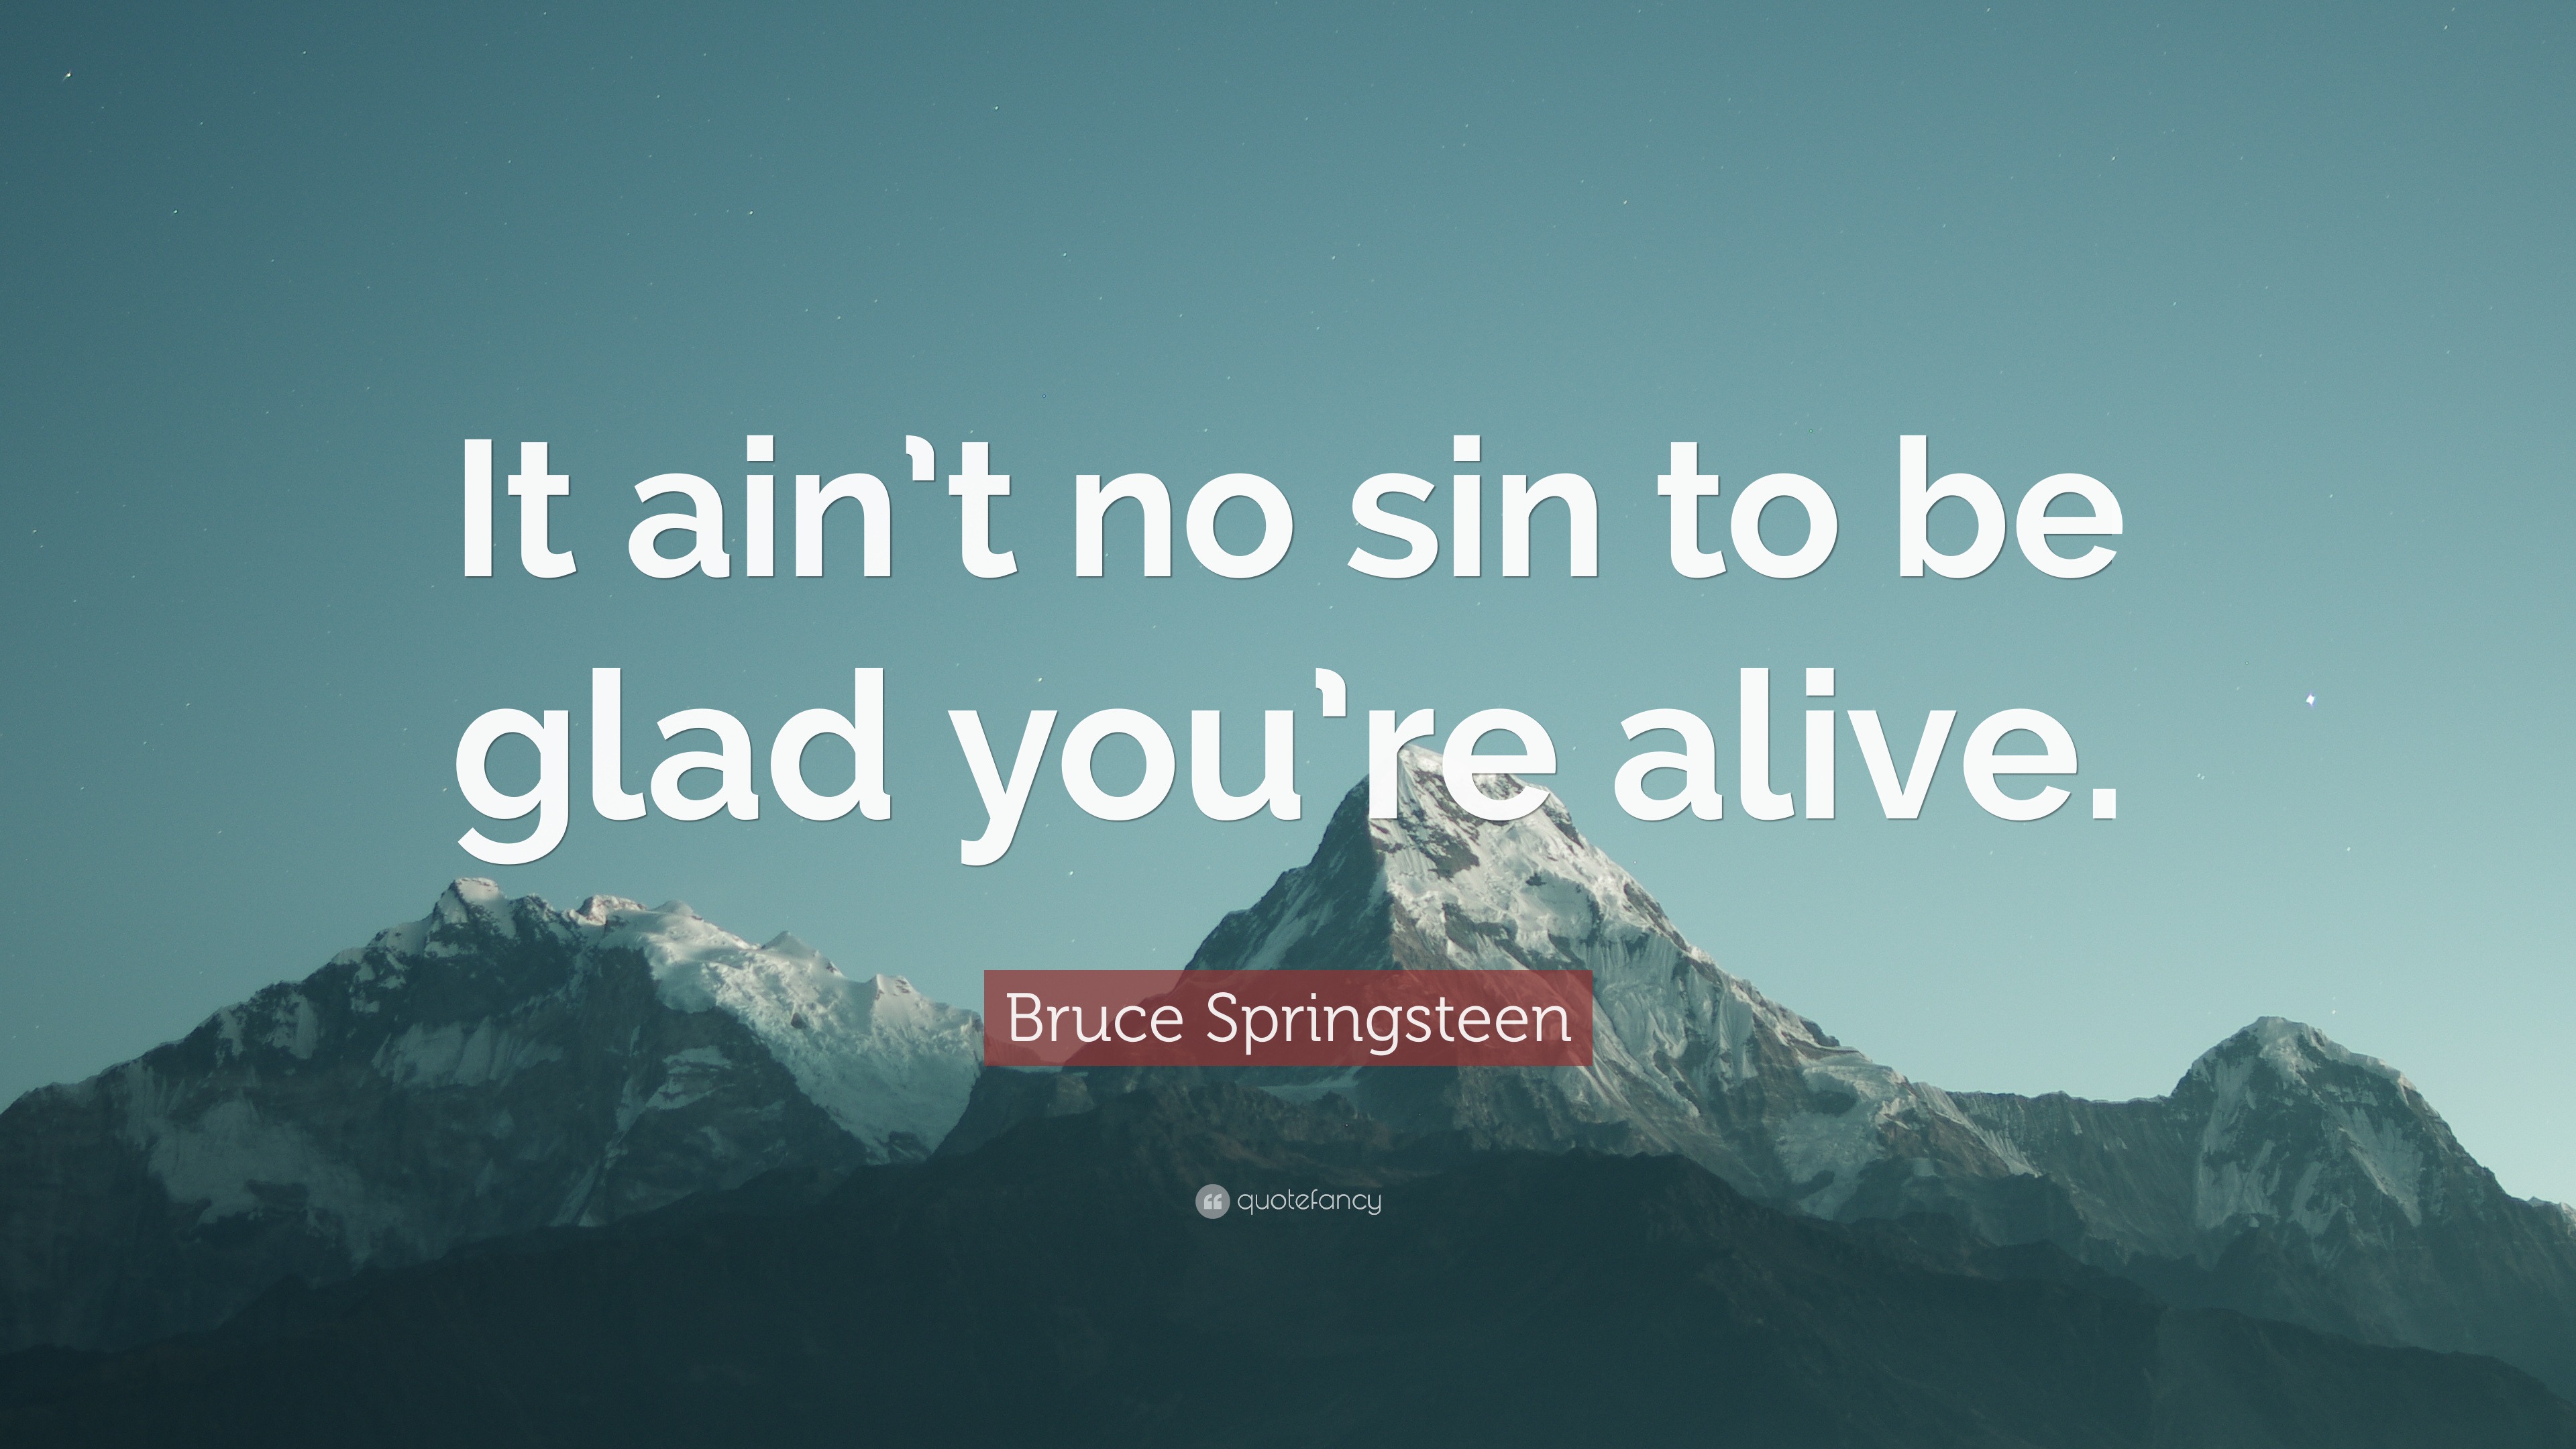 Bruce Springsteen Quote: “It ain't no sin to be glad you're alive.”